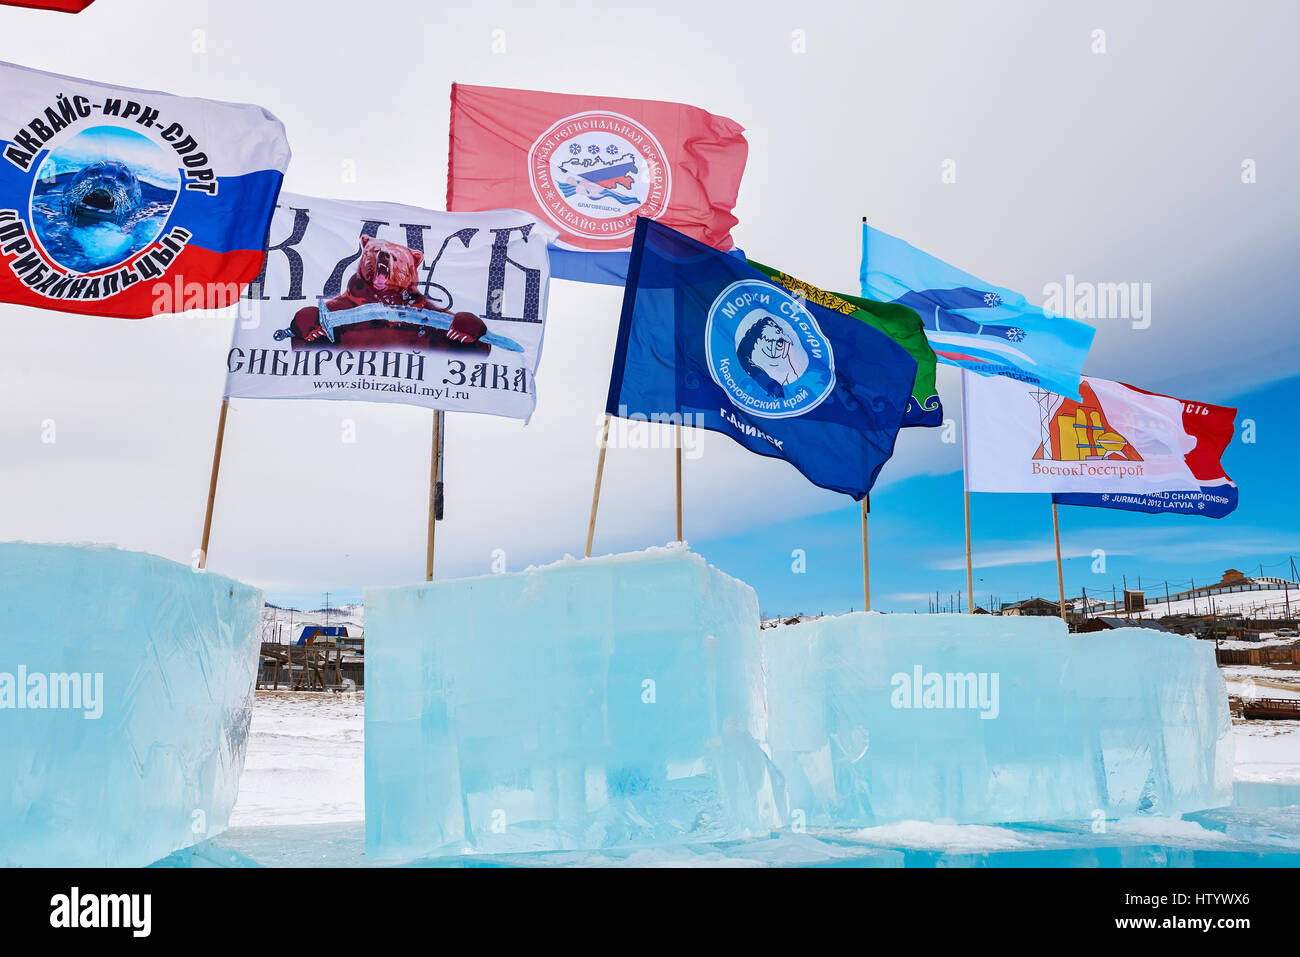 SAHYURTA, IRKUTSK REGION, RUSSIA - March 11.2017: Cup of Baikal. Winter Swimming Competitions. Flags of different clubs for winter swimming on ice cub Stock Photo